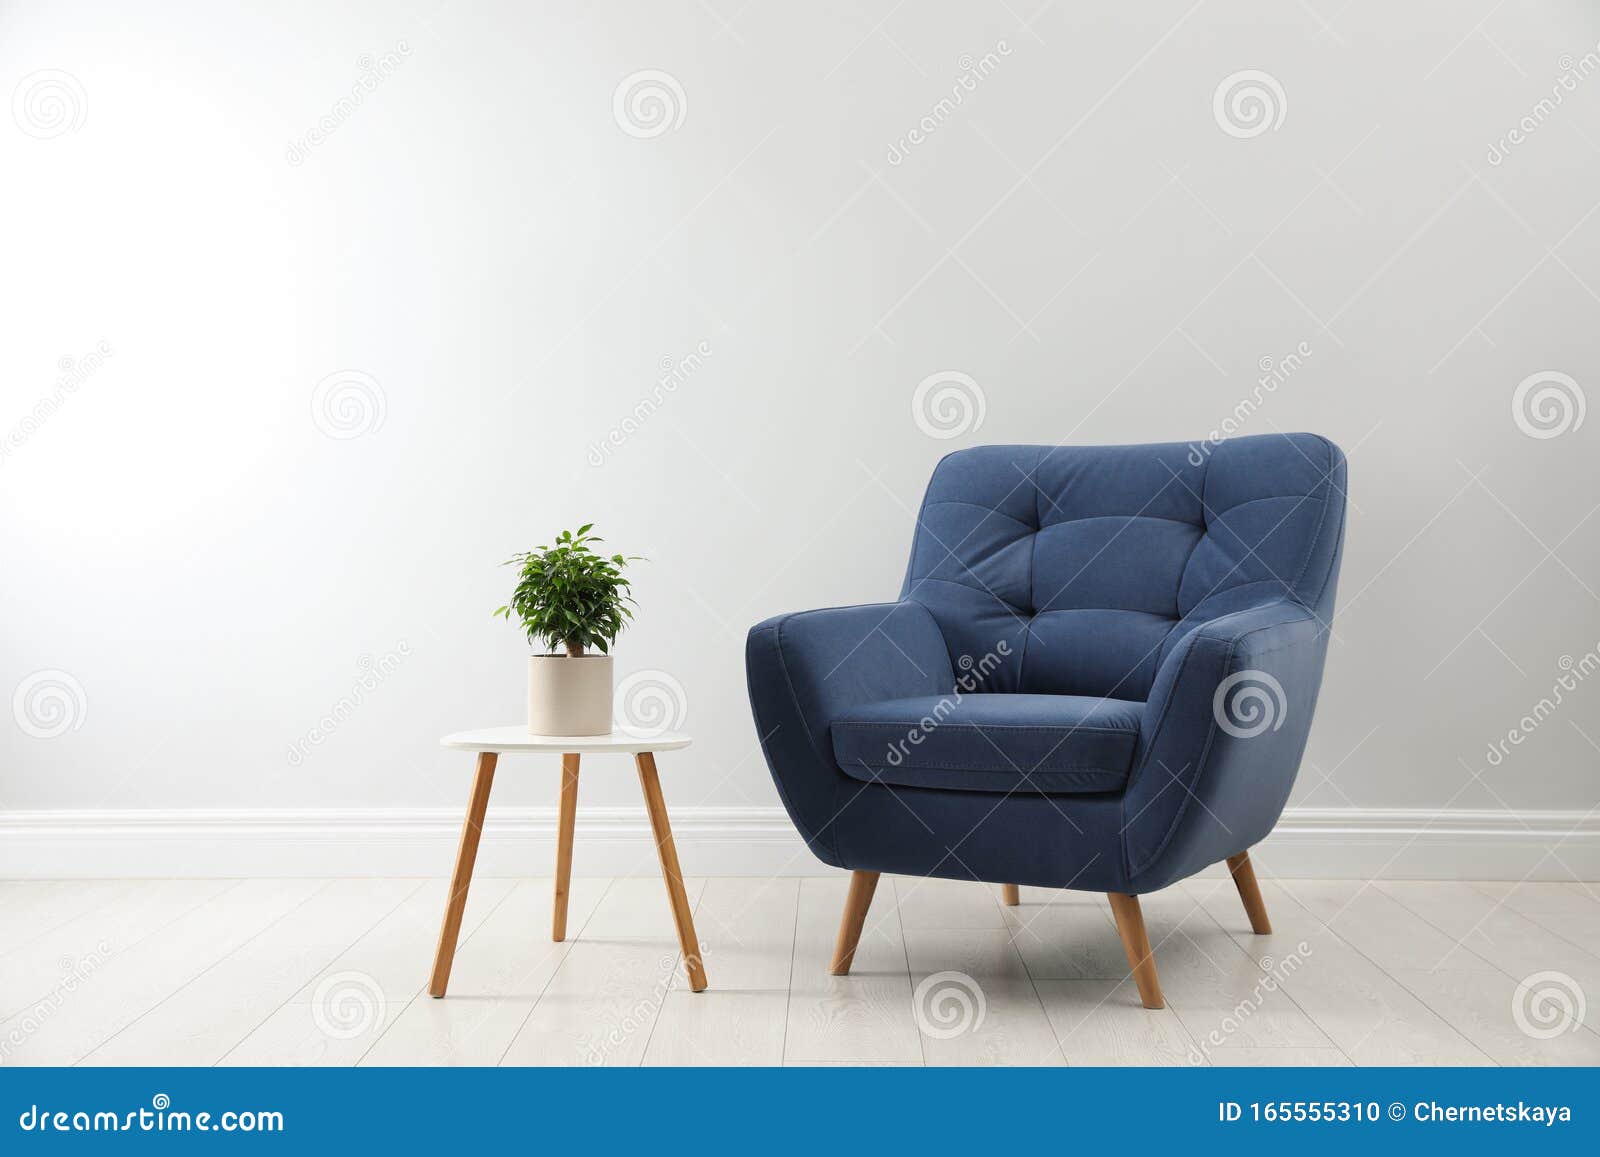 stylish armchair and table with houseplant near wall. interior 